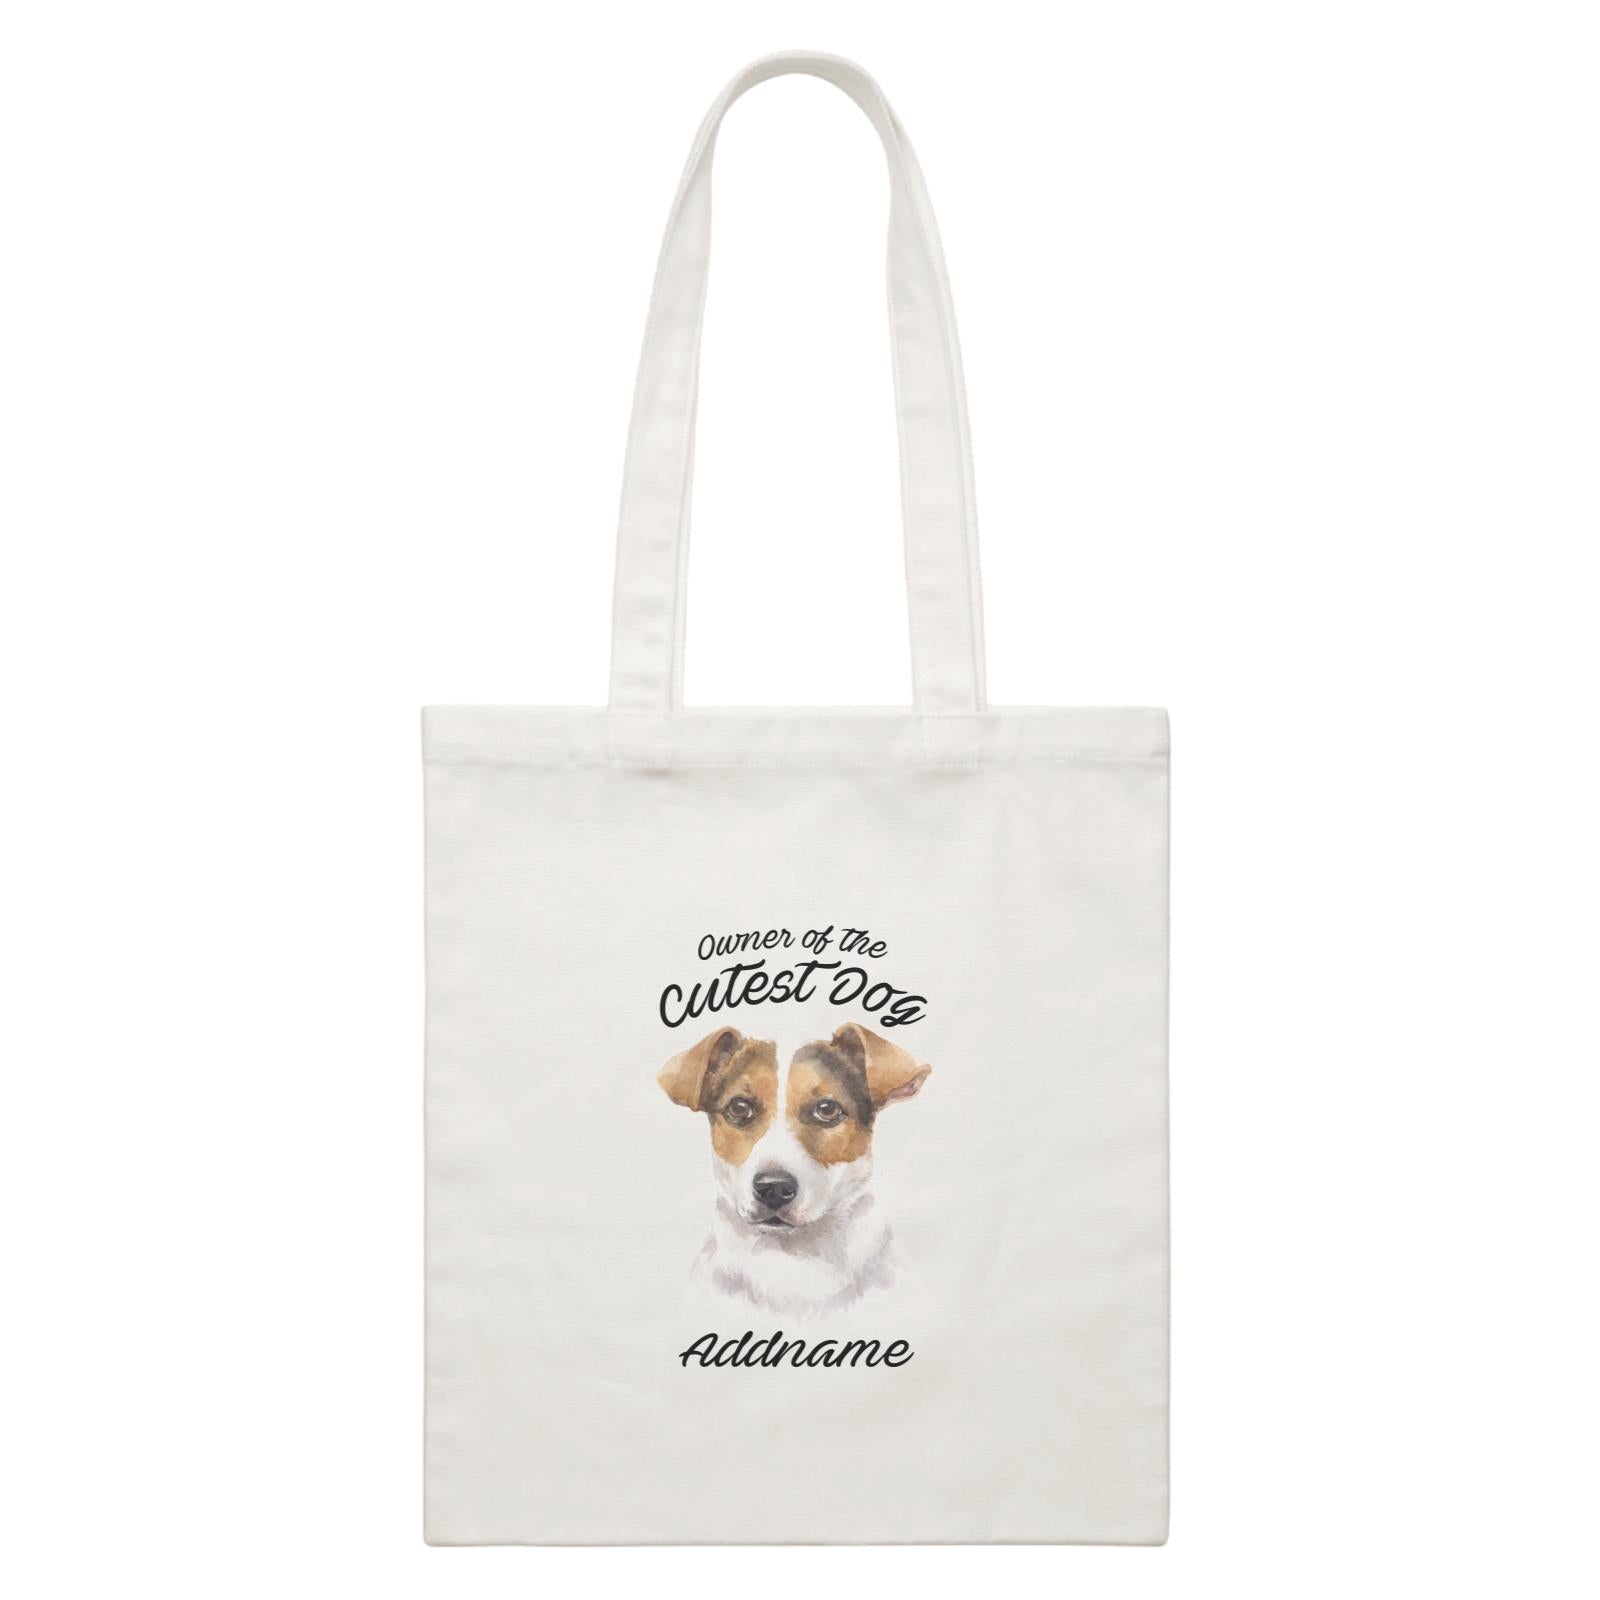 Watercolor Dog Owner Of The Cutest Dog Jack Russell Short Hair Addname White Canvas Bag